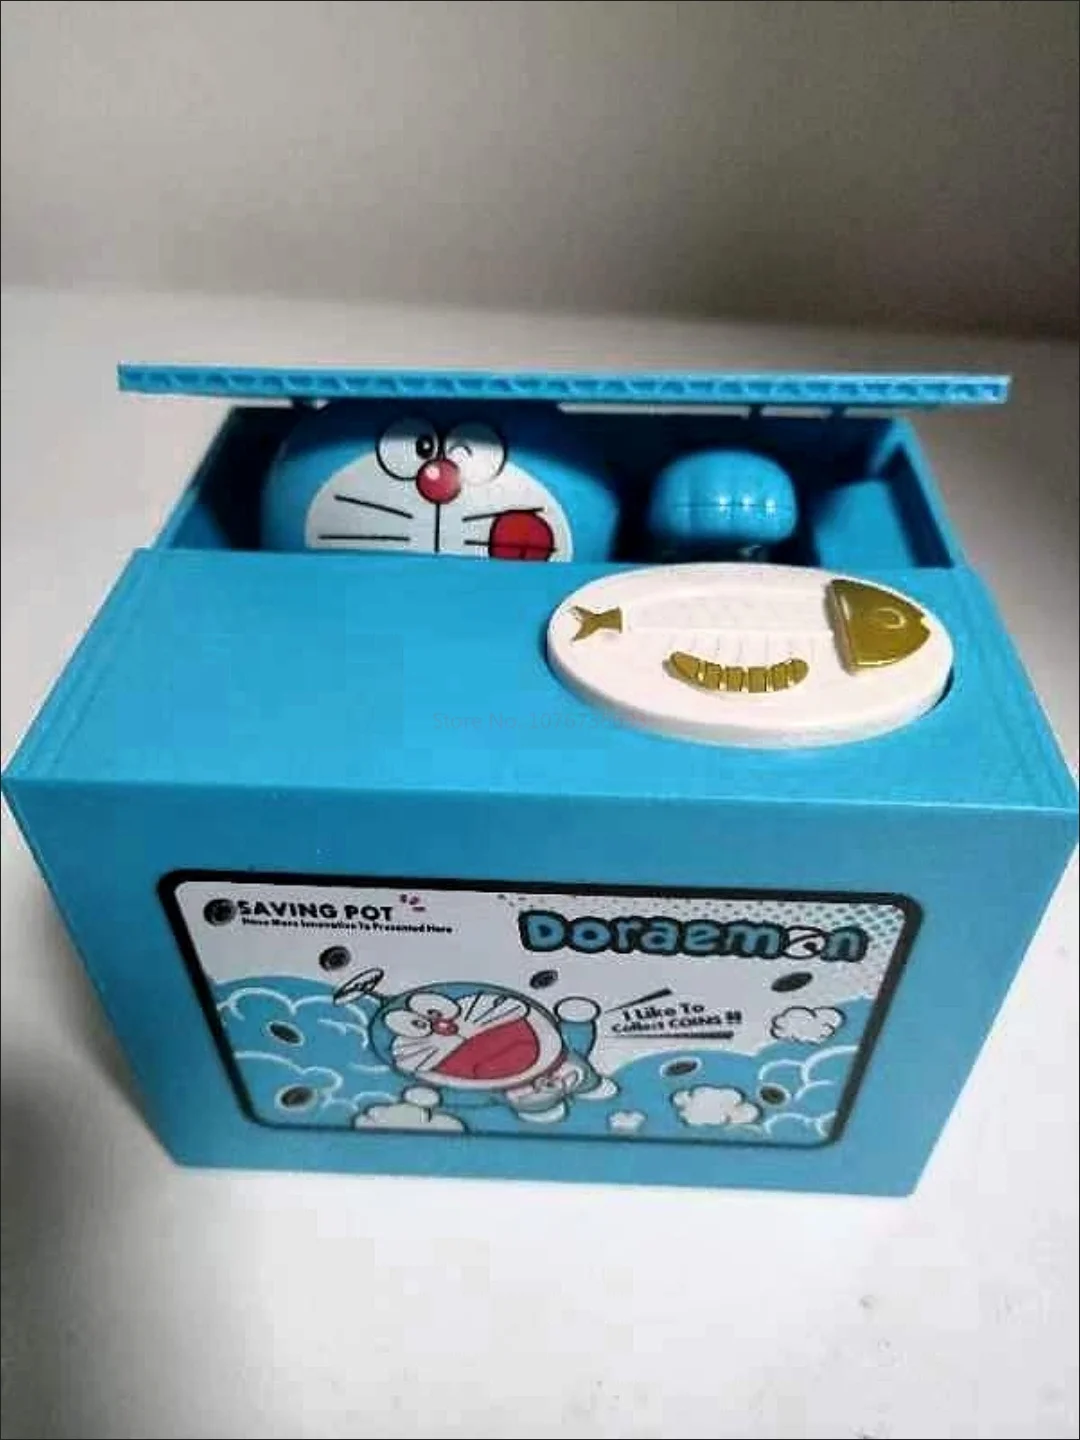 Jack-in-the-Box Toys in the Digital Age: Balancing Traditional Play with Technology插图